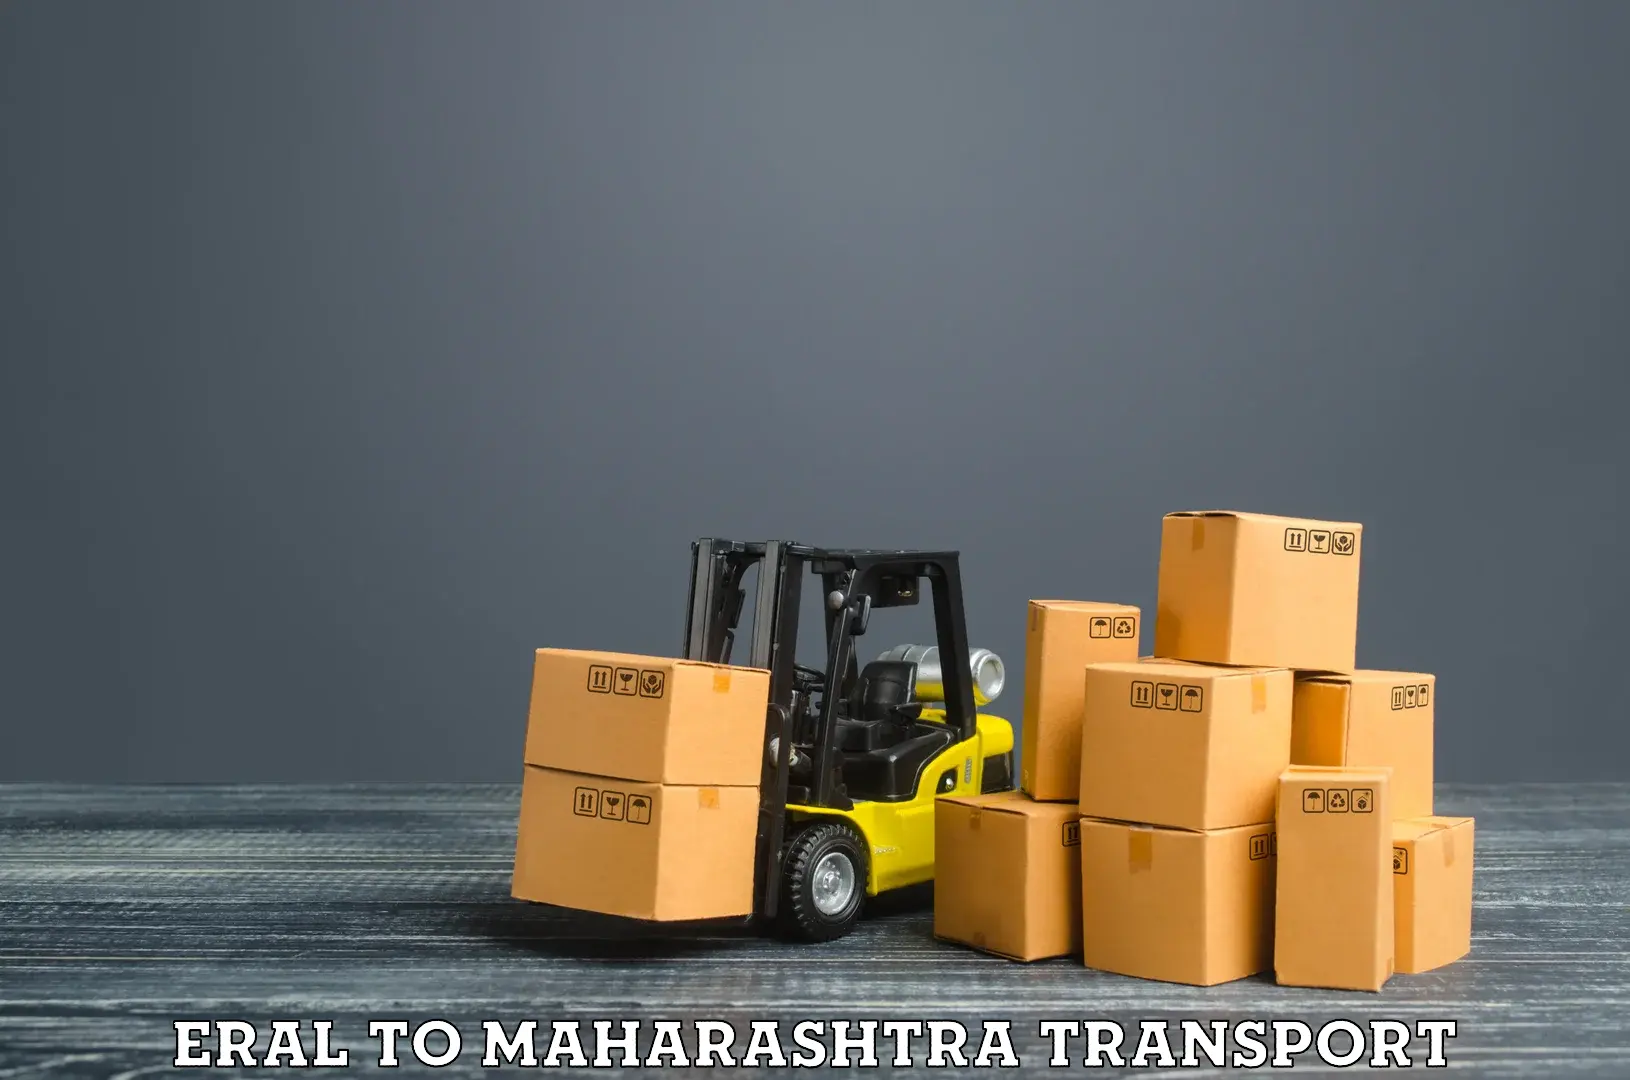 Truck transport companies in India Eral to Kolhapur